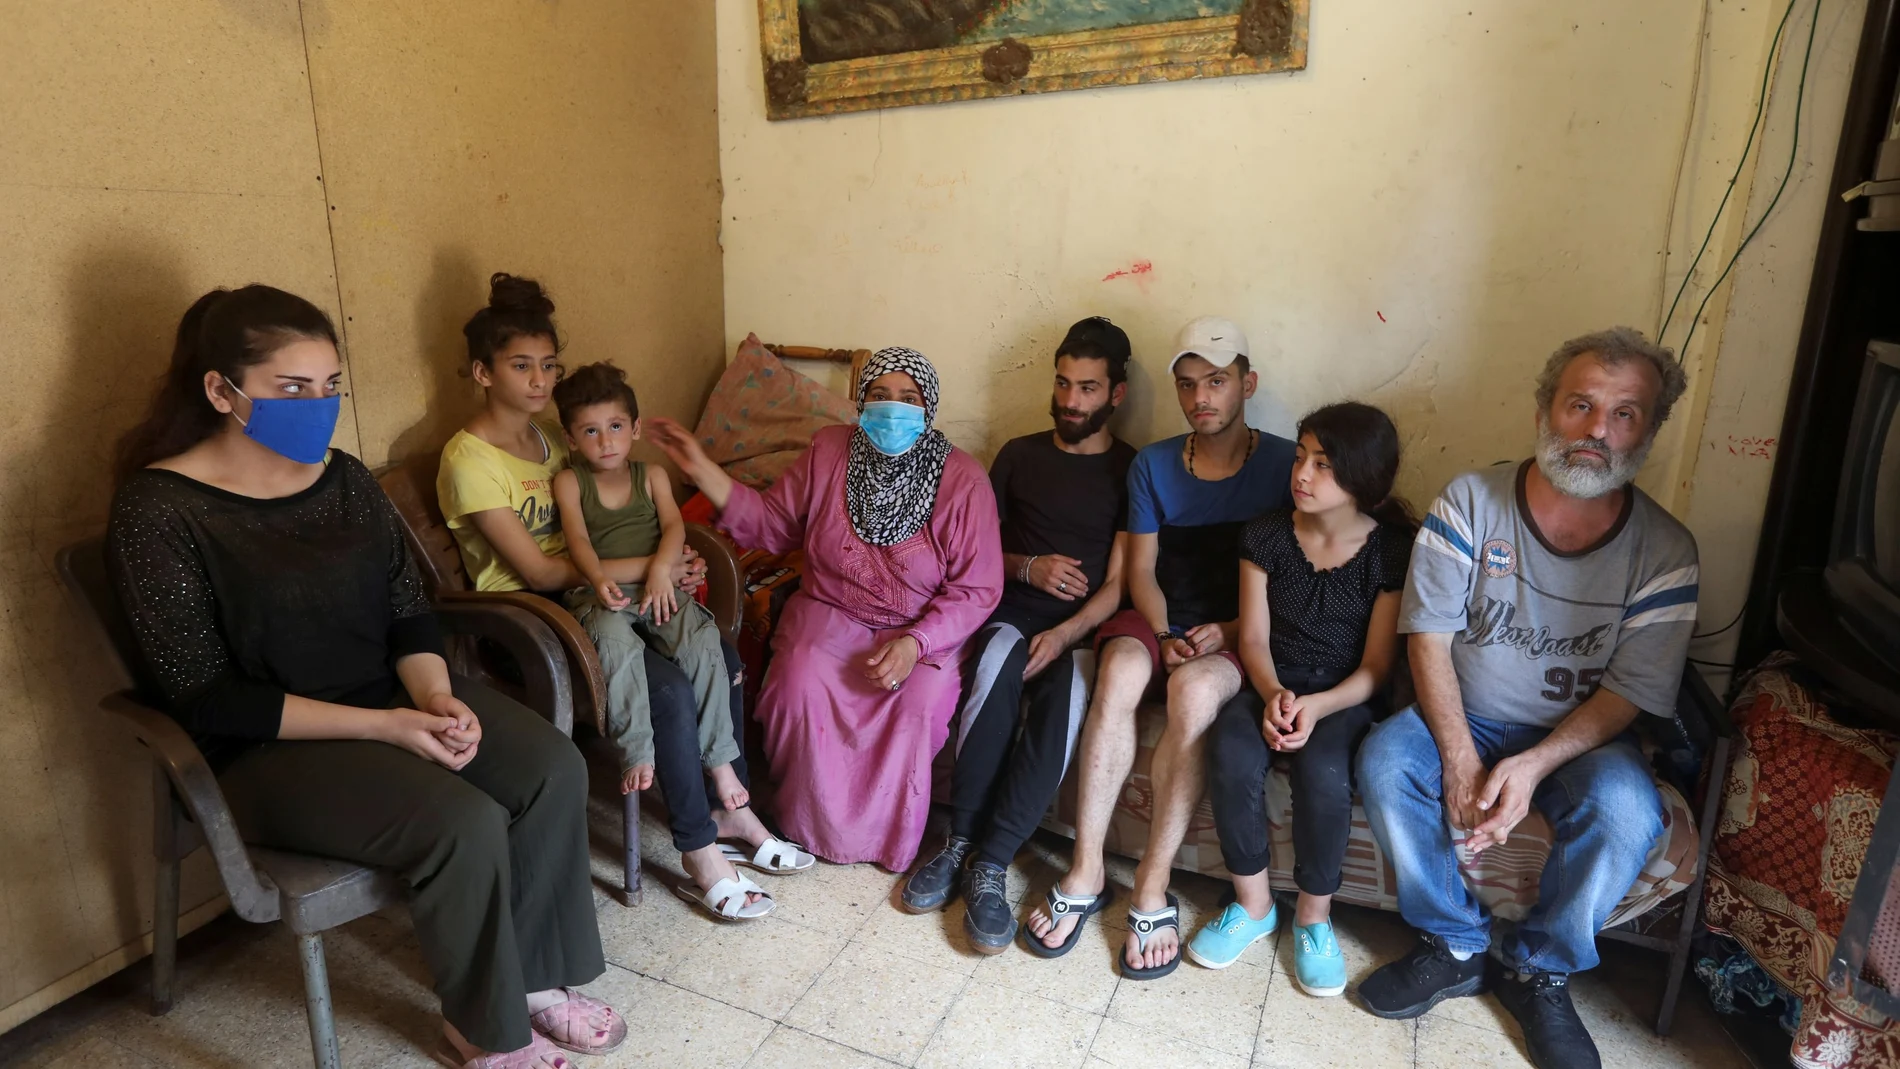 Iman al-Ali sits with her family in a room in Tripoli